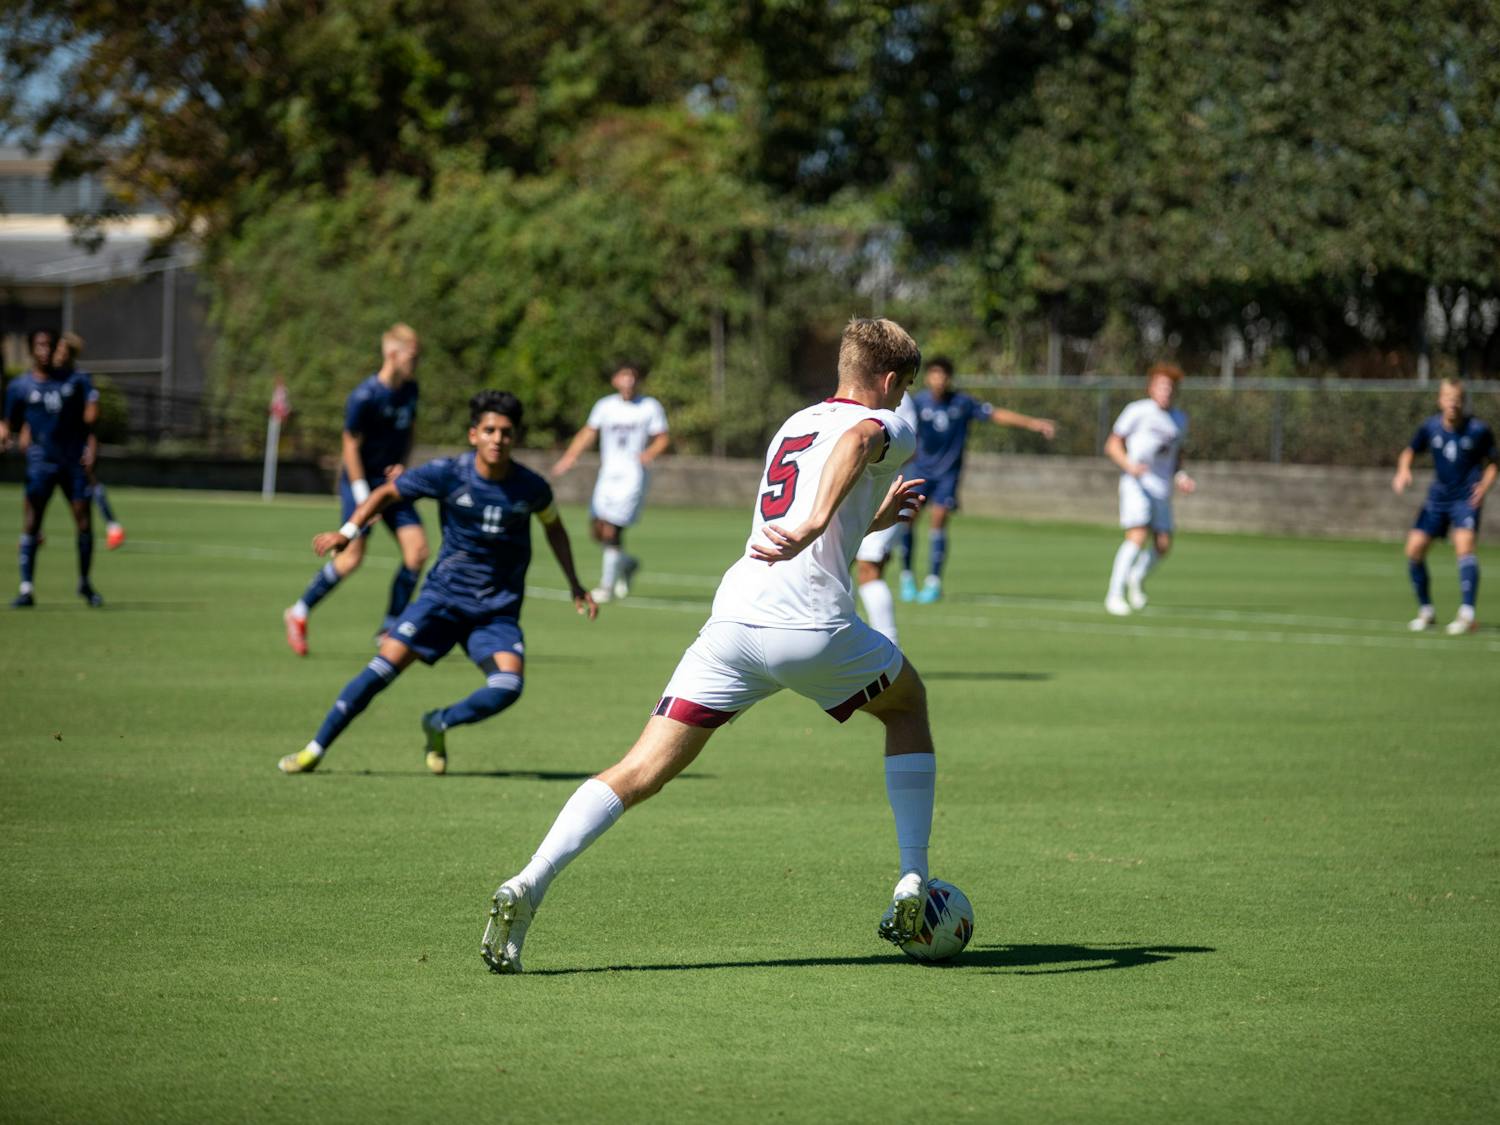 Freshman defender William Nilsson, runs after the ball to gain control at the men’s soccer game on Saturday, Sept. 24th, 2022.